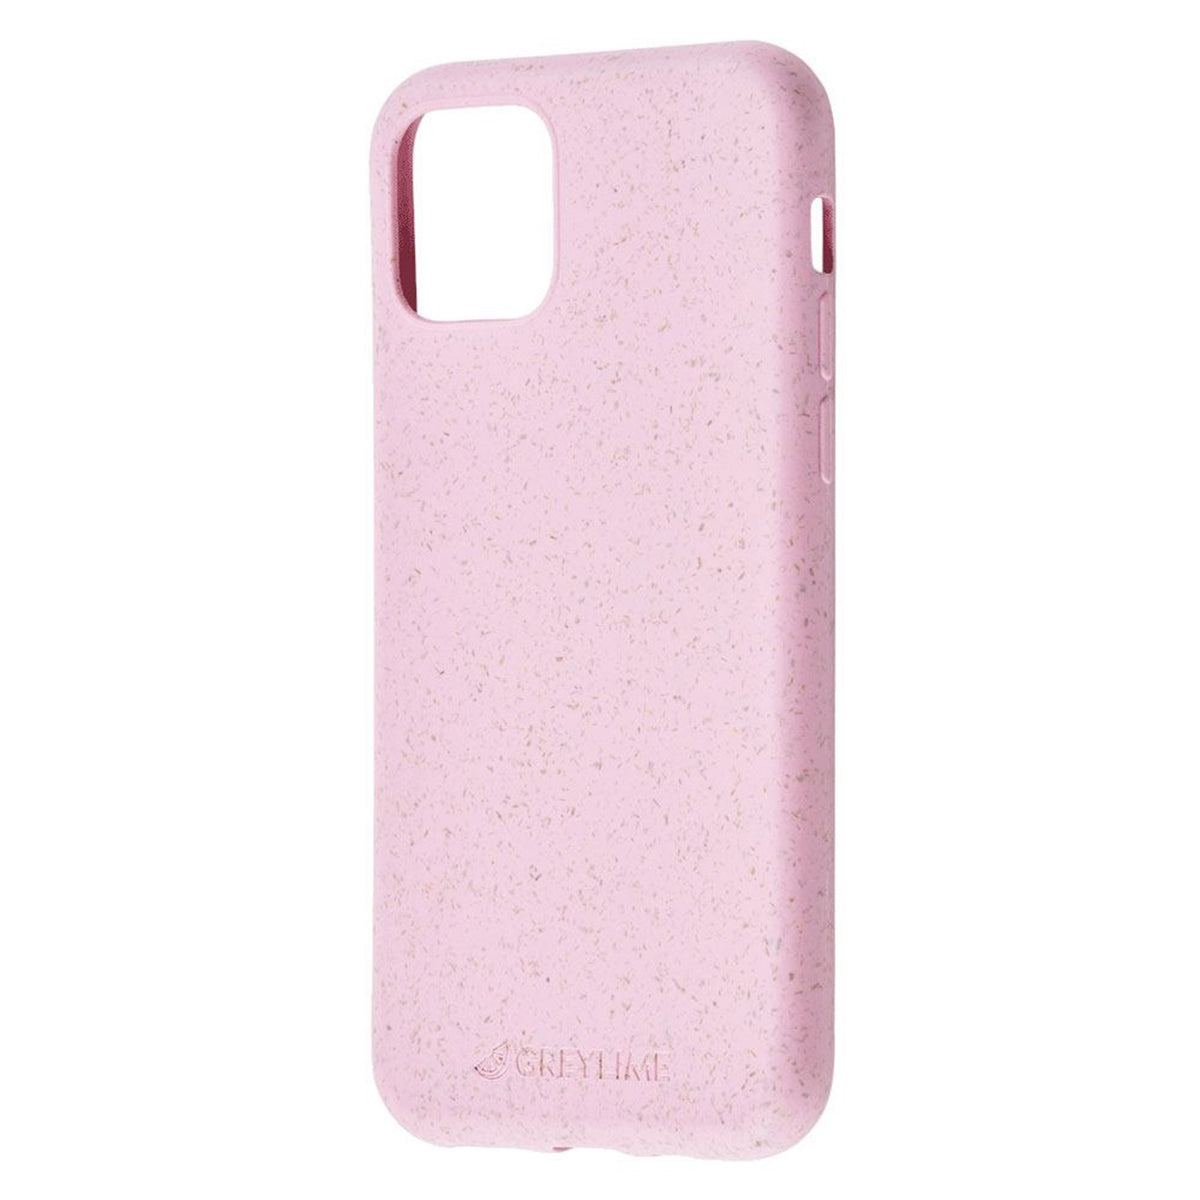 GreyLime-iPhone-11-Pro-Max-biodegradable-cover-Pink-COIP11PM05-V2.jpg